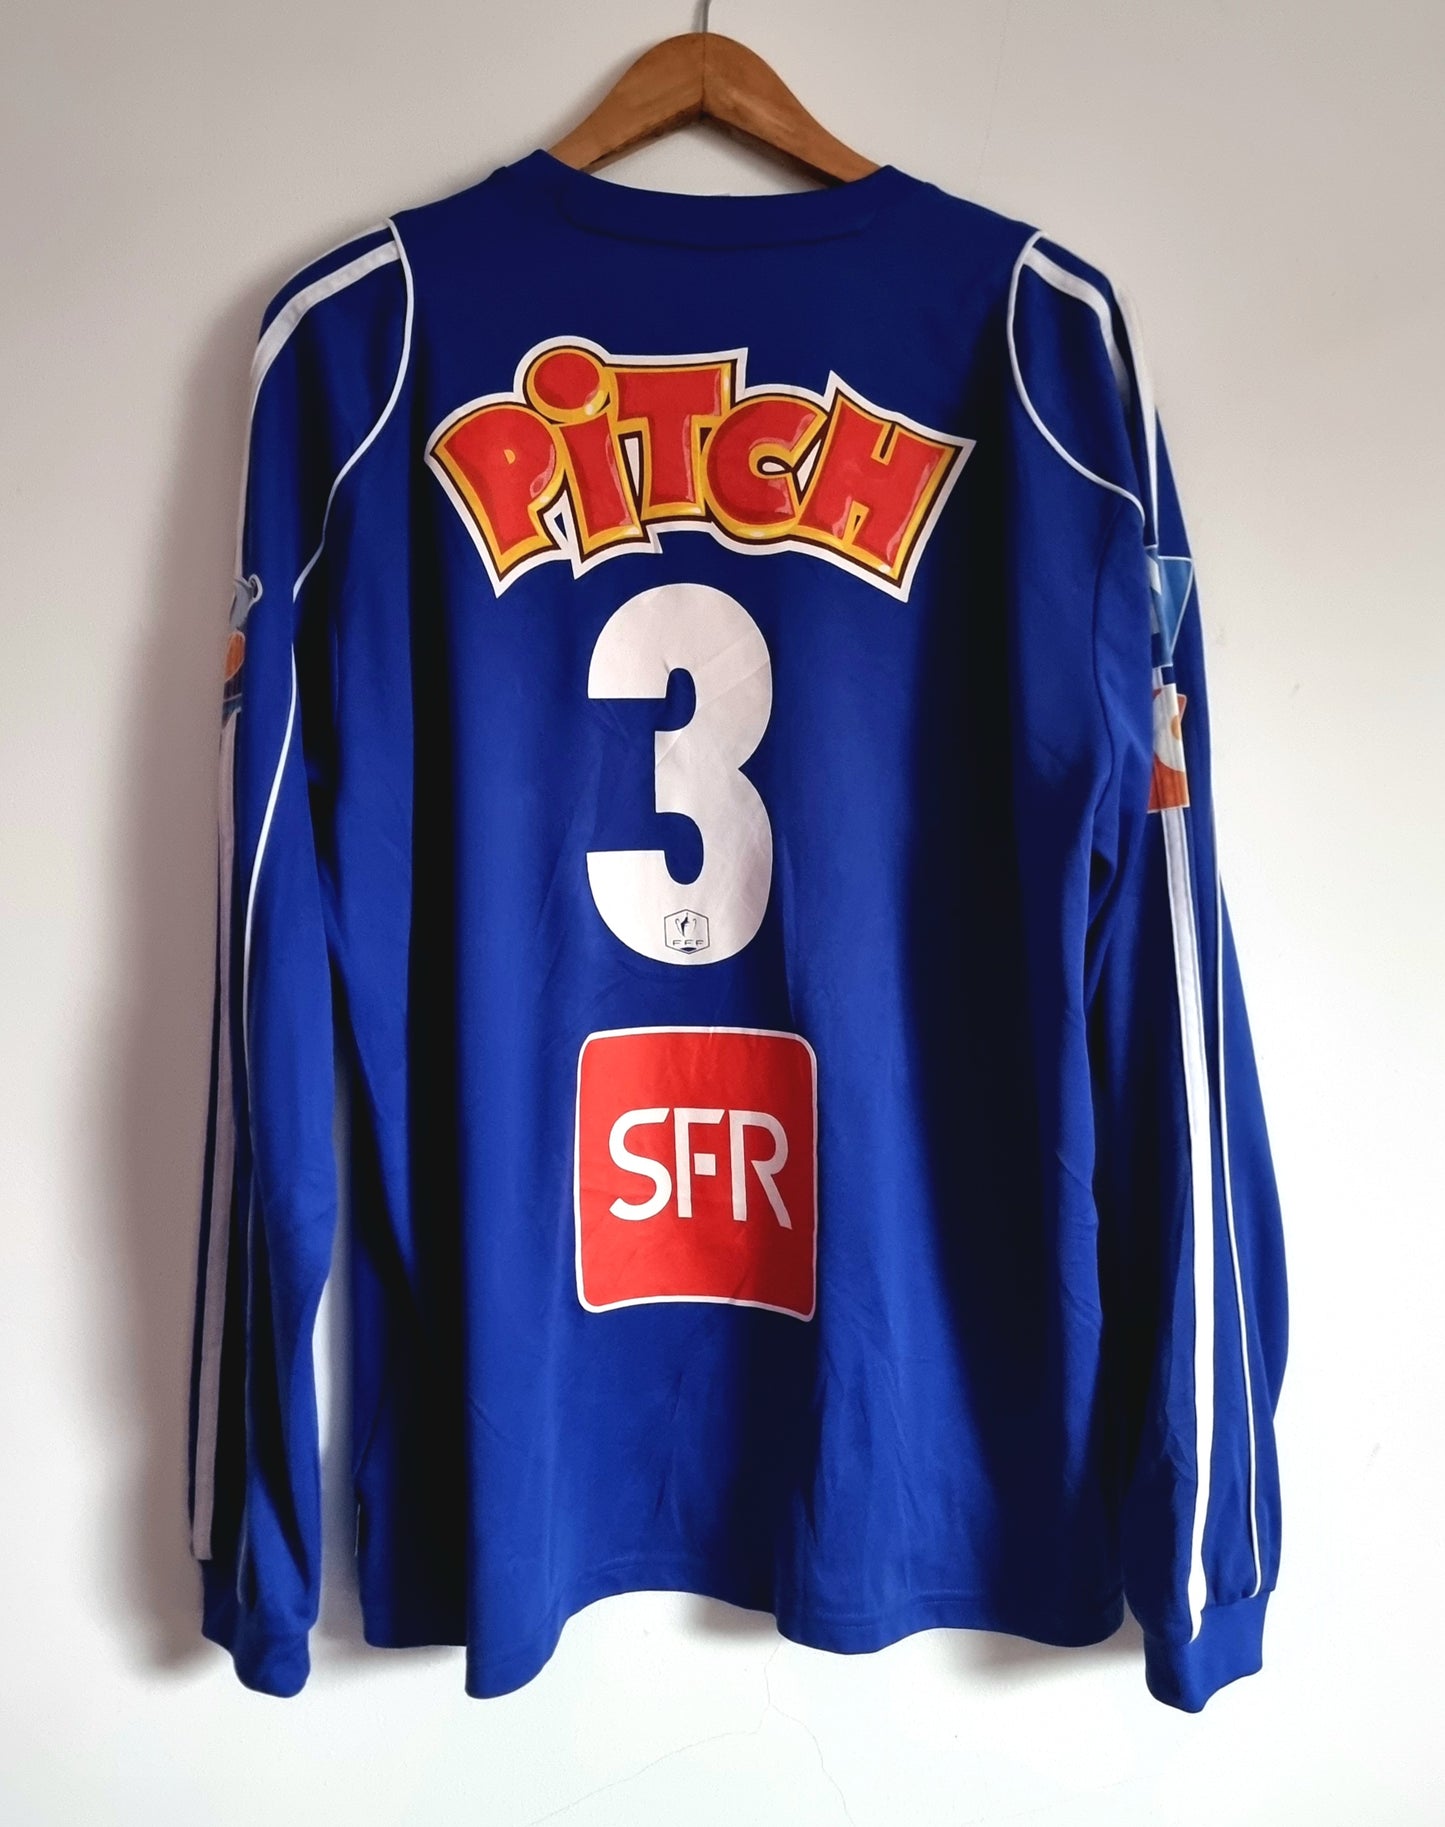 Adidas Coupe De France 07/08 Player Issue Long Sleeve Shirt XL